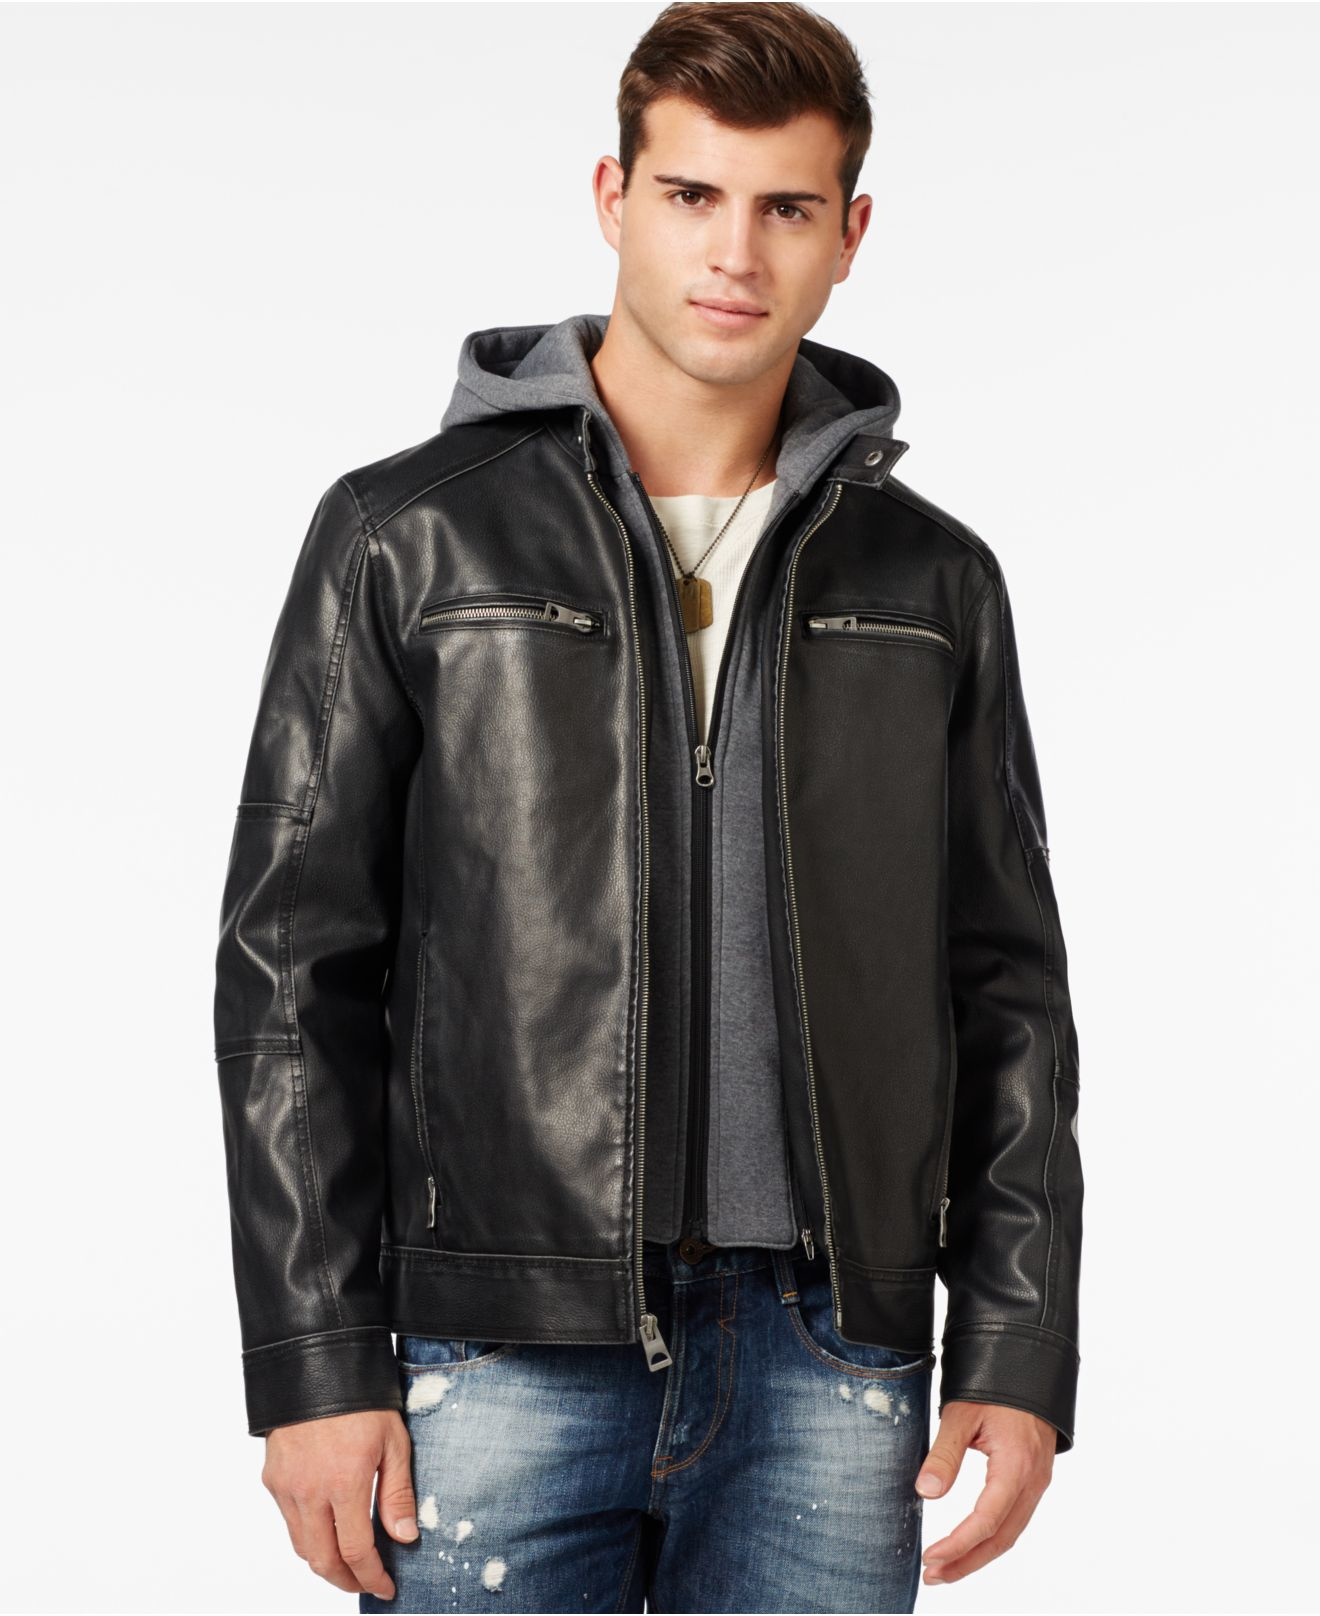 Guess Faux-leather Moto Jacket in Black for Men - Lyst